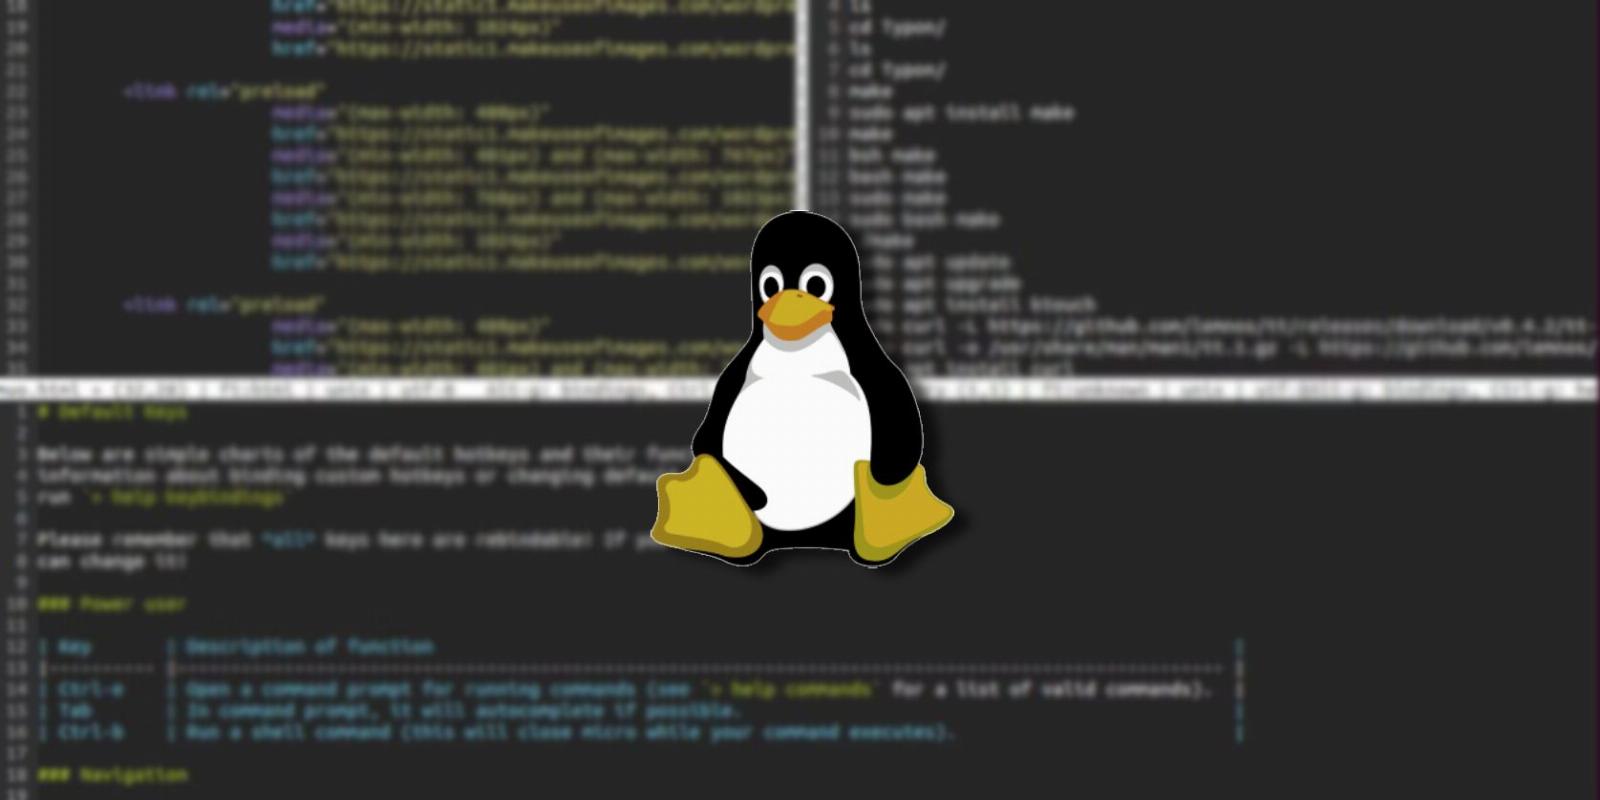 4 Lesser-Known Terminal-Based Text Editors for Linux You Should Consider